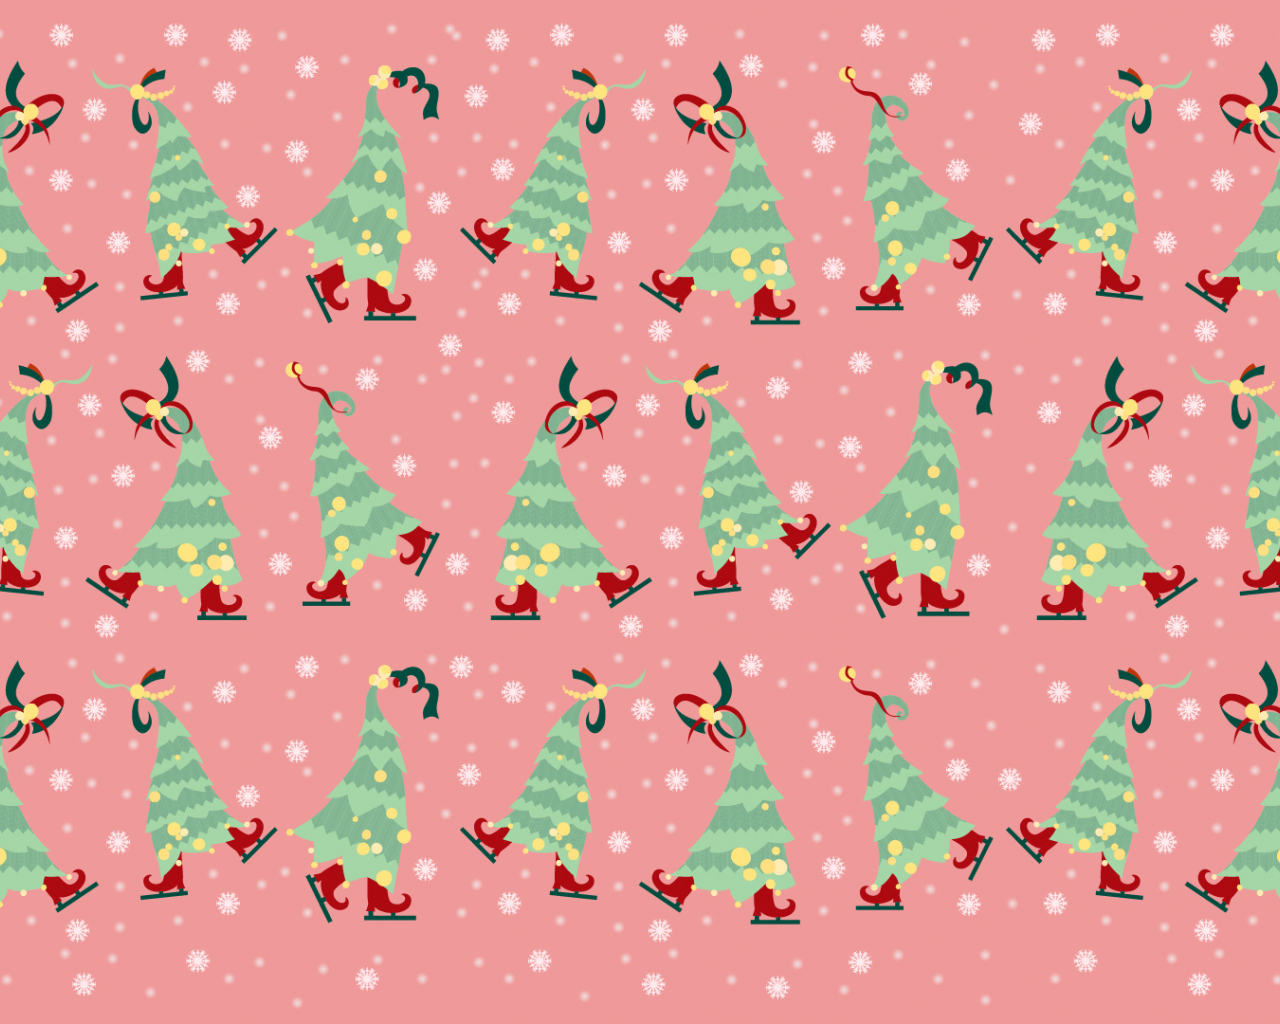 Aesthetic Cute Christmas Wallpapers posted by Ethan Mercado